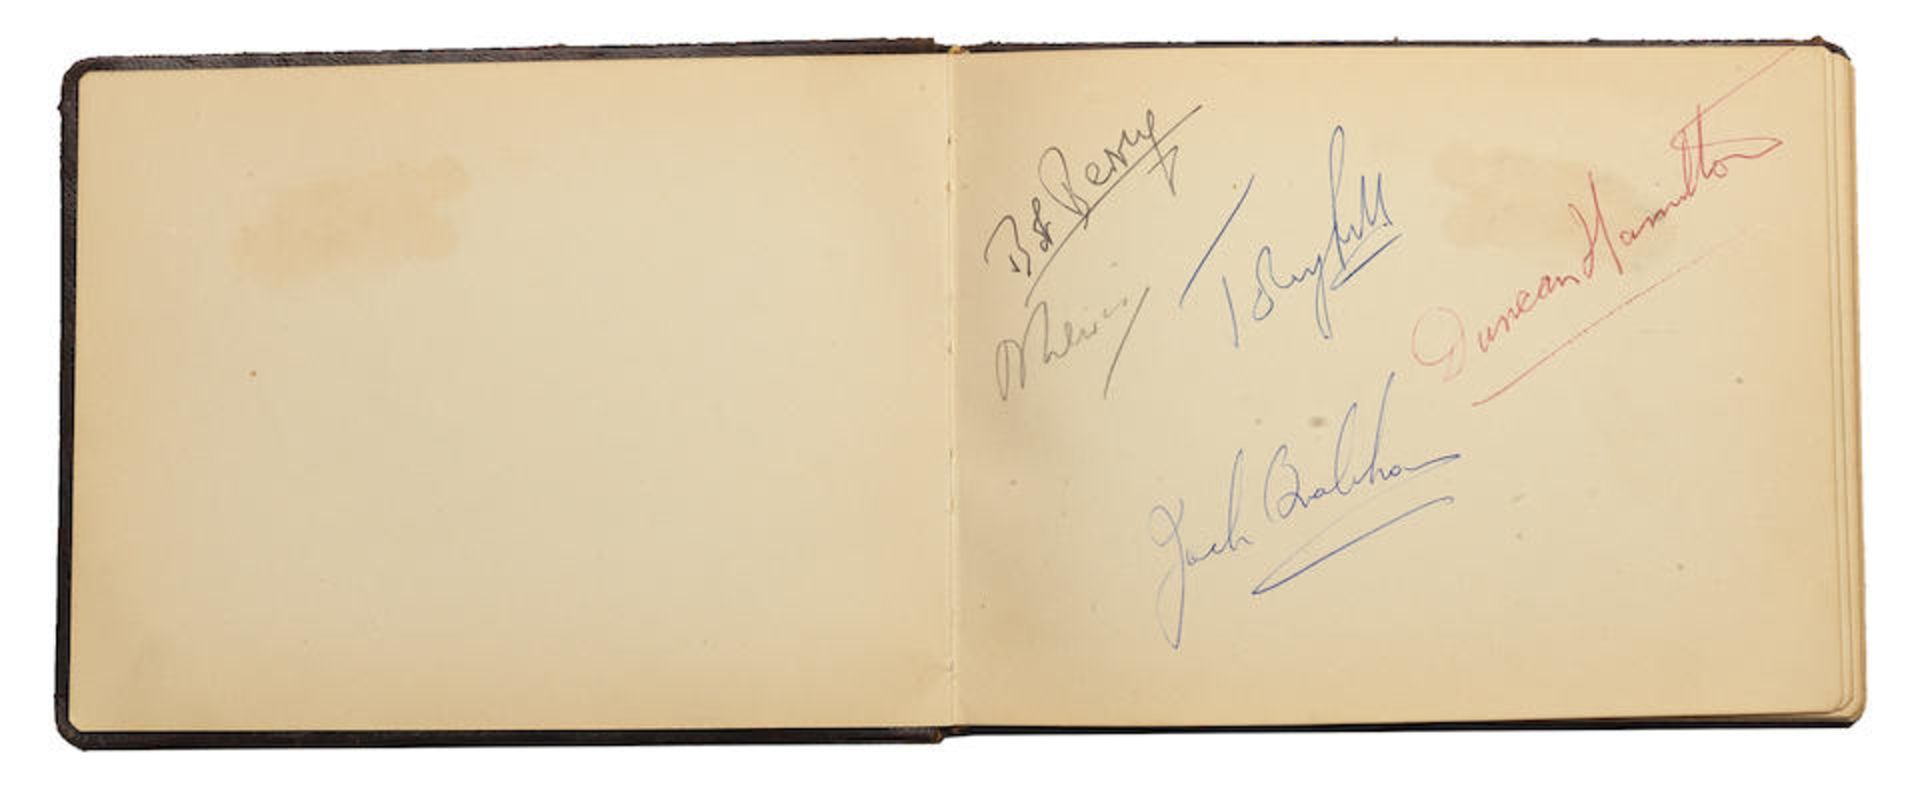 An autograph book comprising many signatures including Mike Hawthorn and Picasso, ((2)) - Image 3 of 5